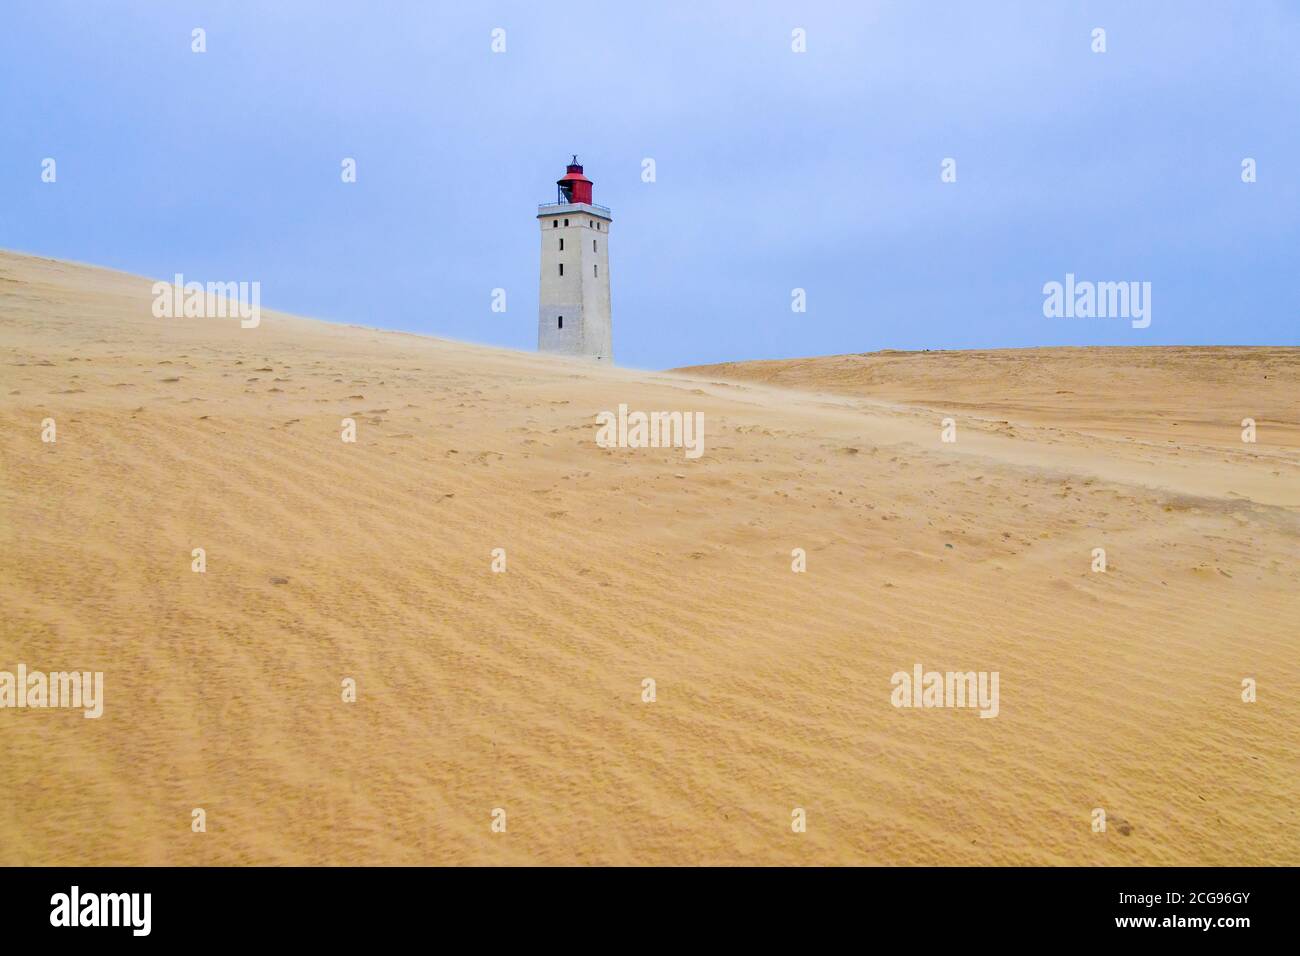 Stock Photography and Images - Alamy